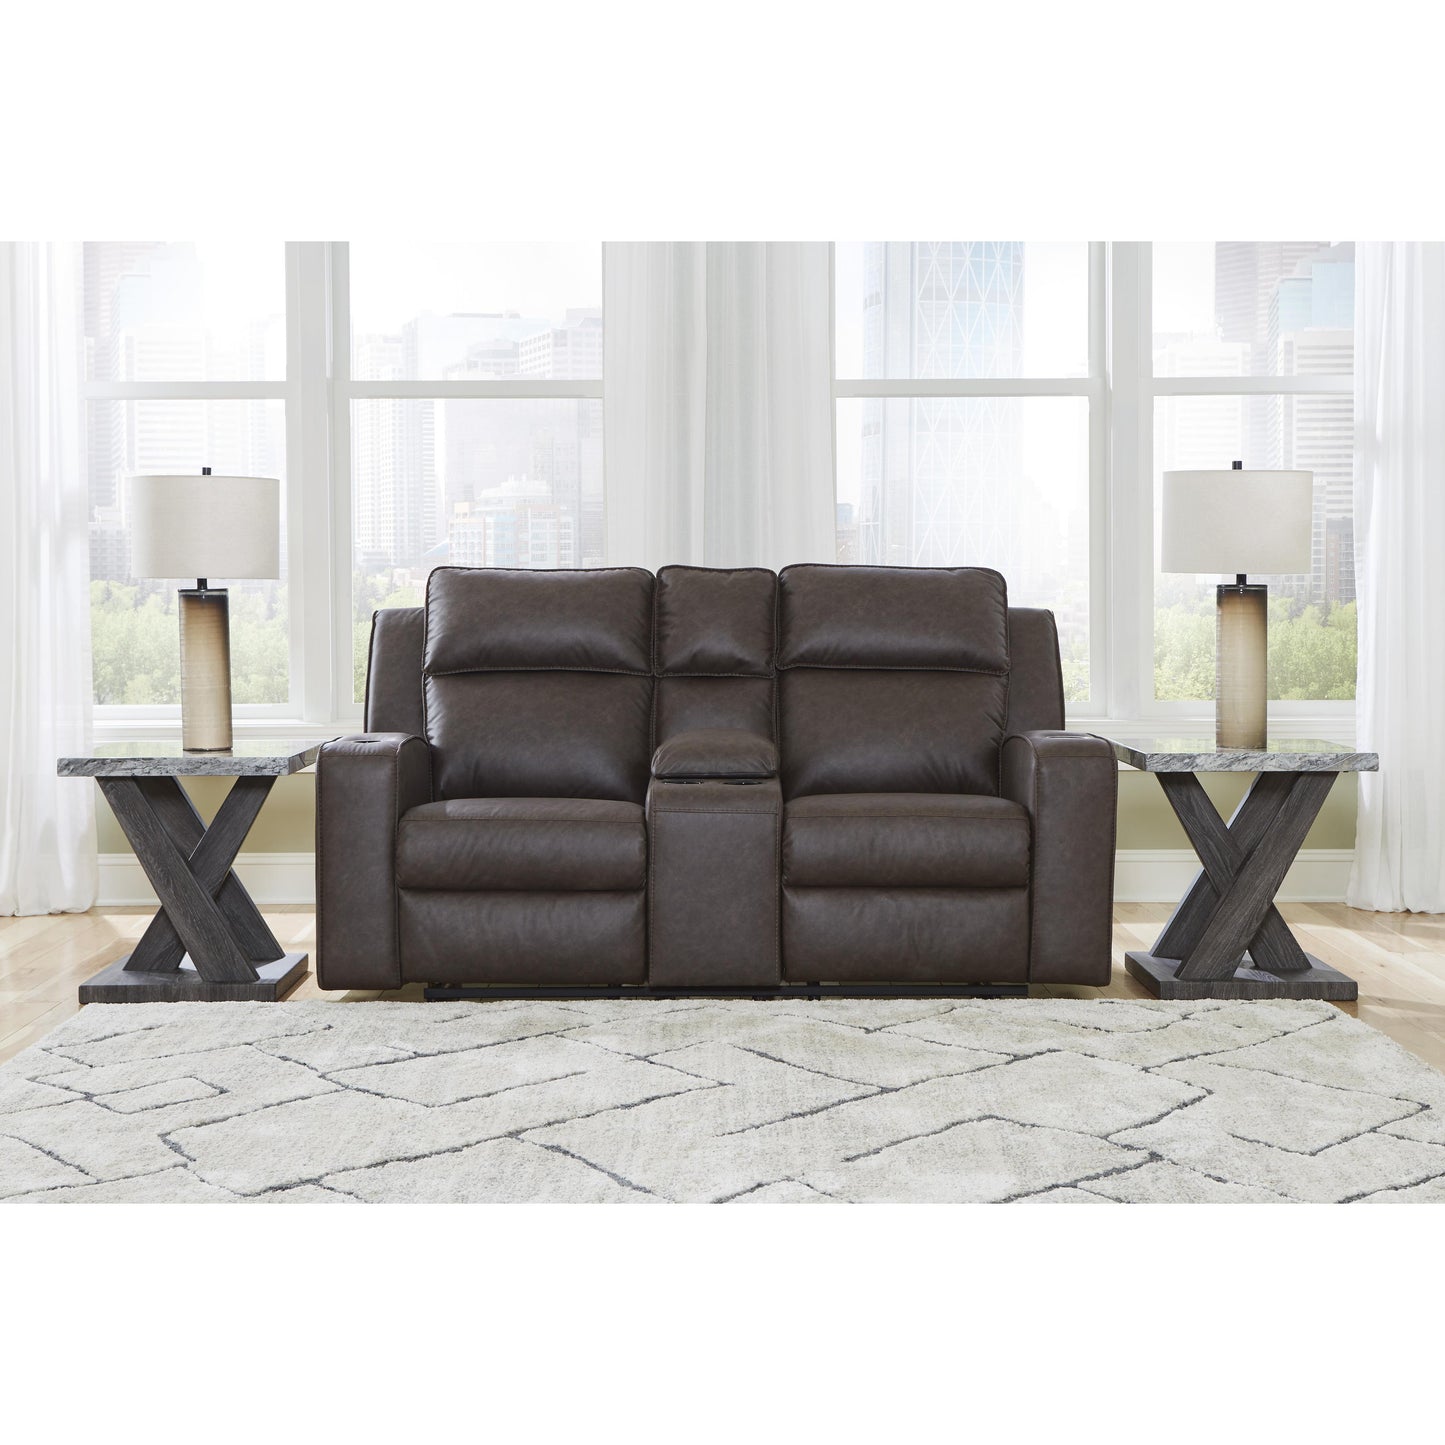 Signature Design by Ashley Lavenhorne Reclining Leather Look Loveseat 6330694 IMAGE 6